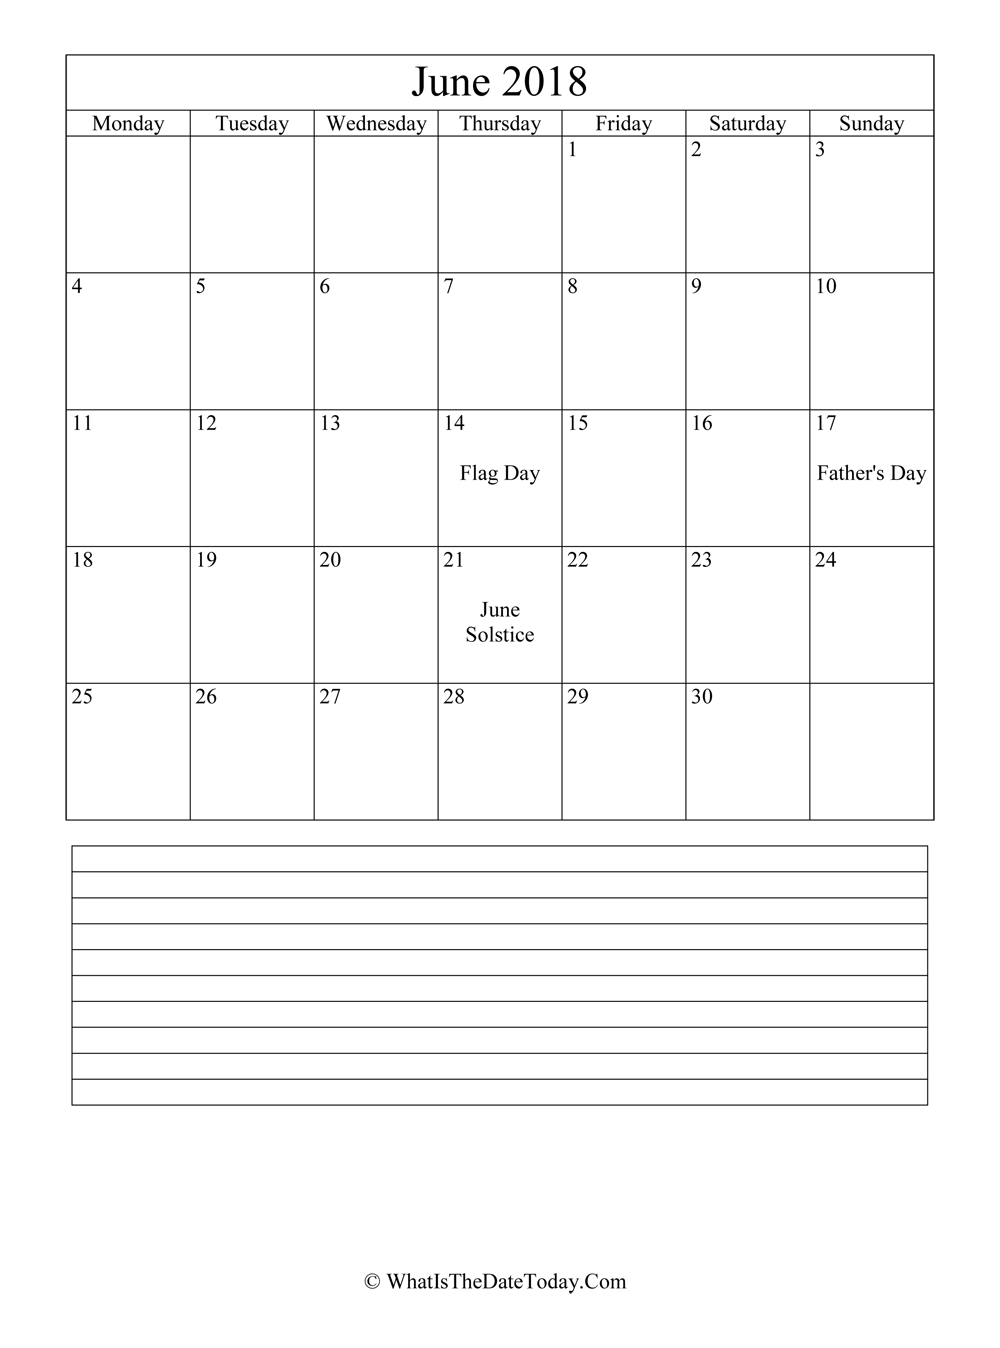 june 2018 calendar editable with notes in vertical layout